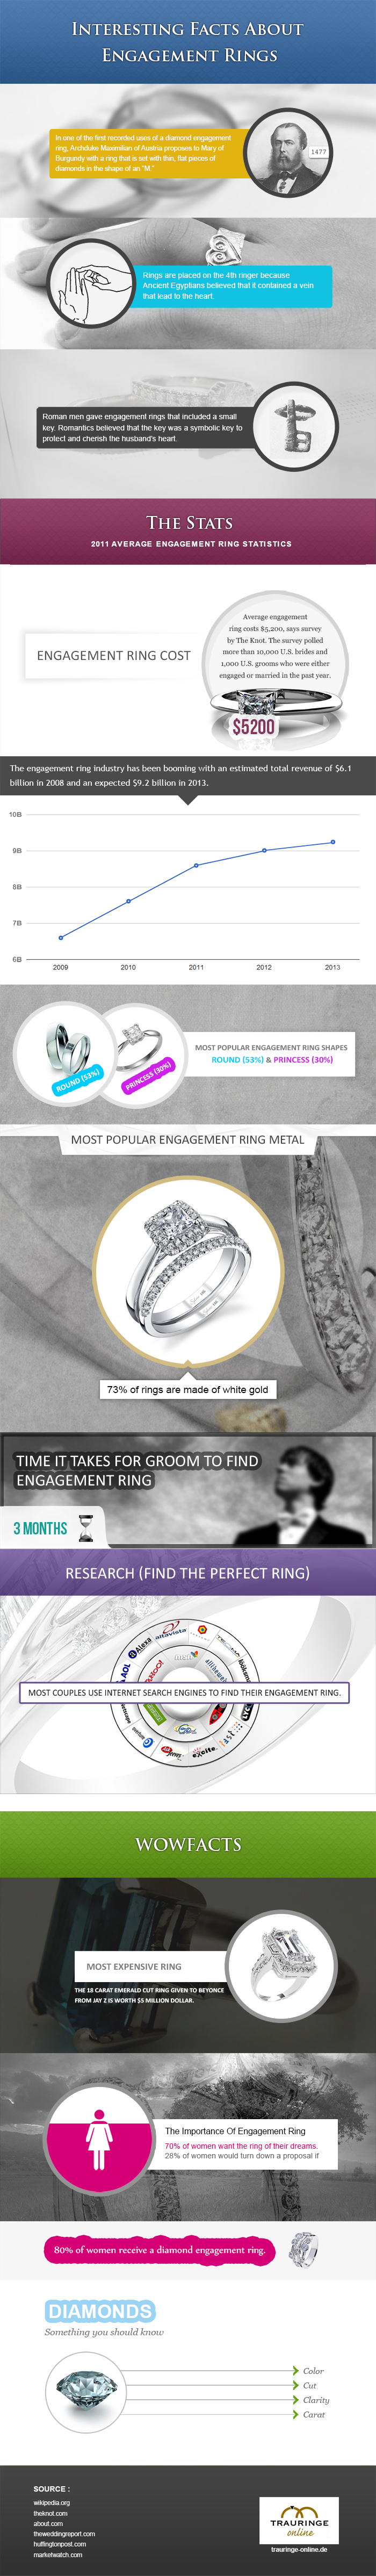 Interesting Facts About Engagement Rings